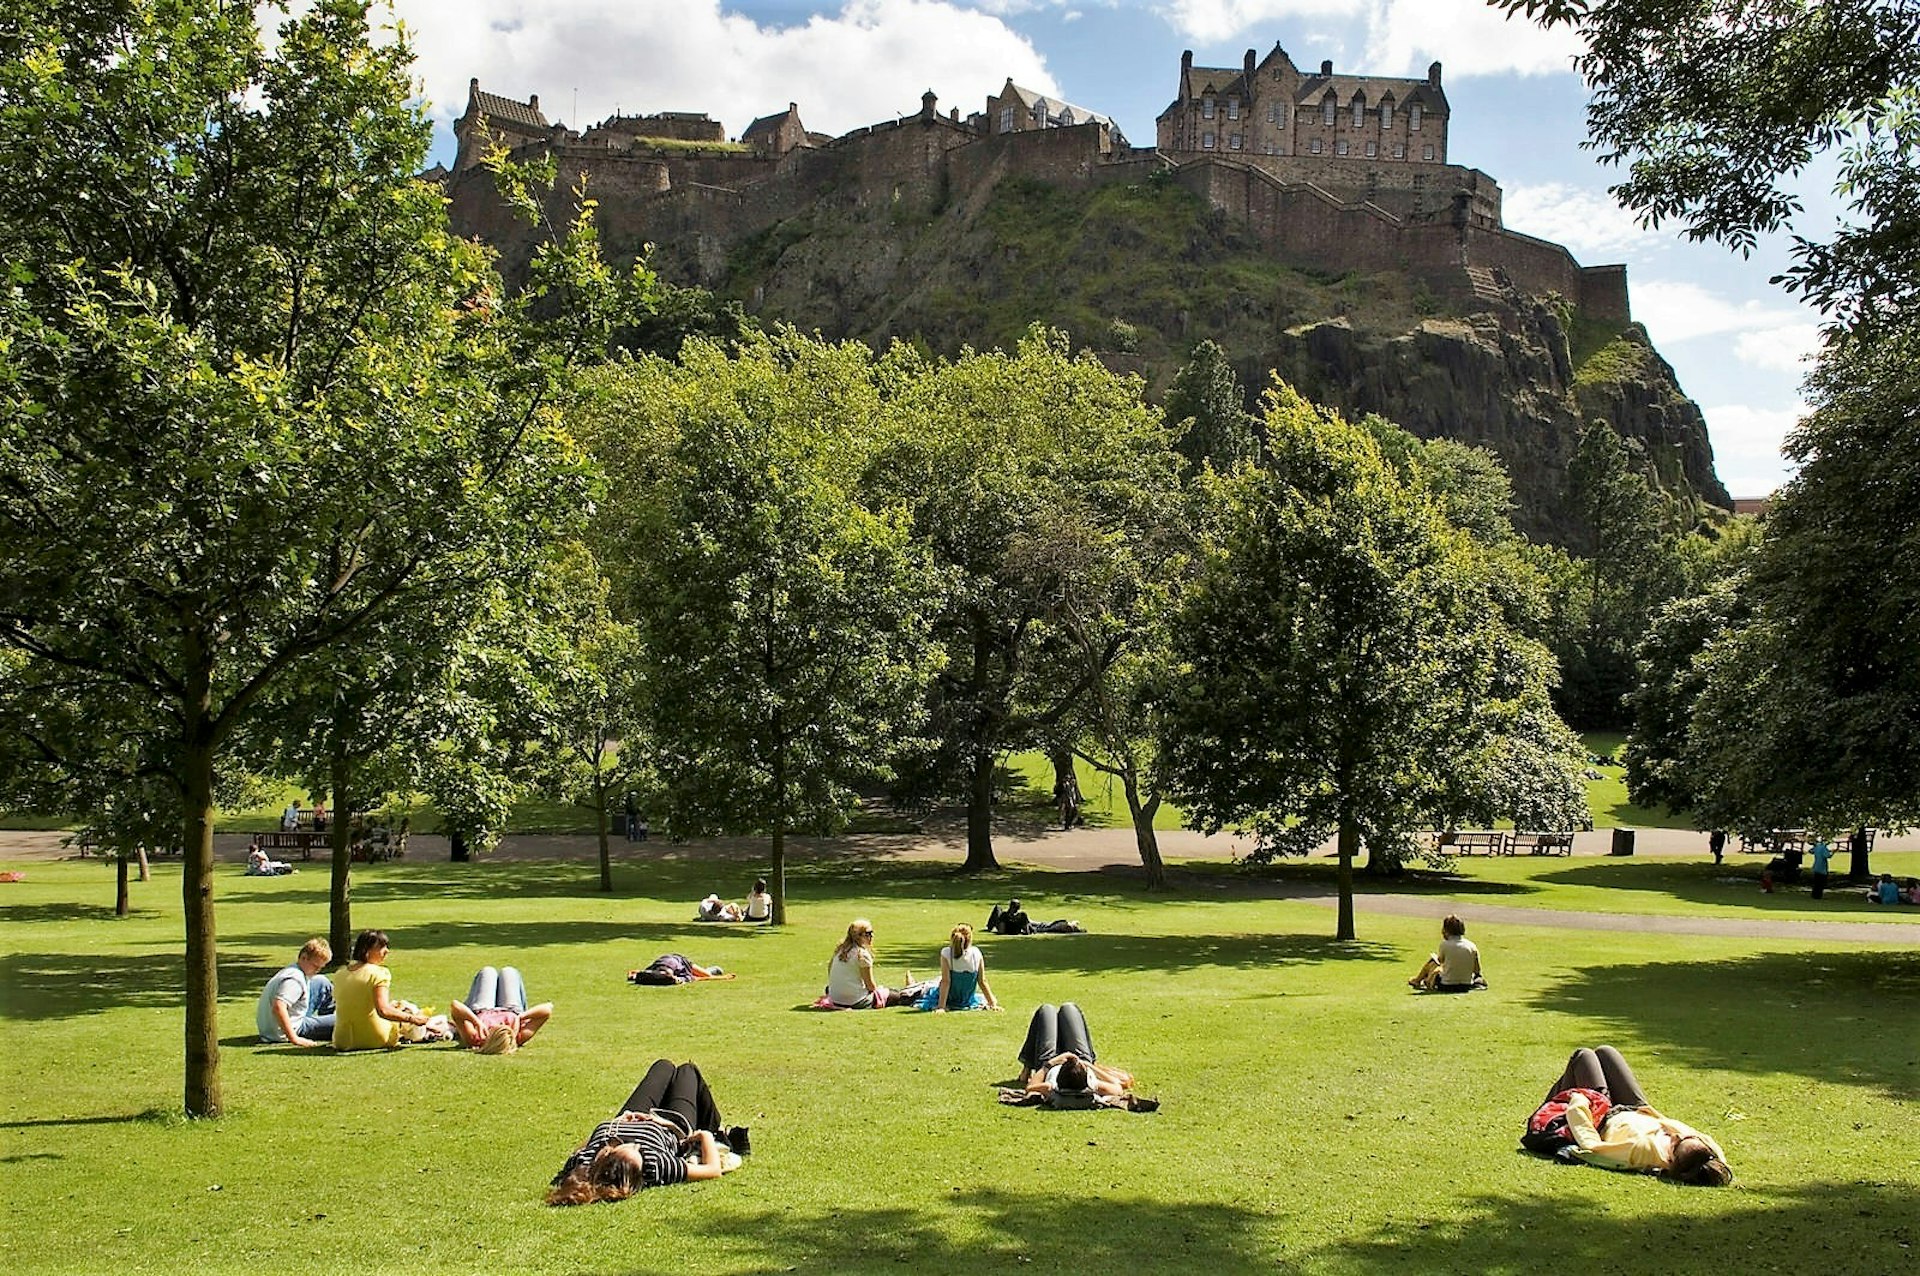 When you need a rest with a view, head to Princes Street Gardens